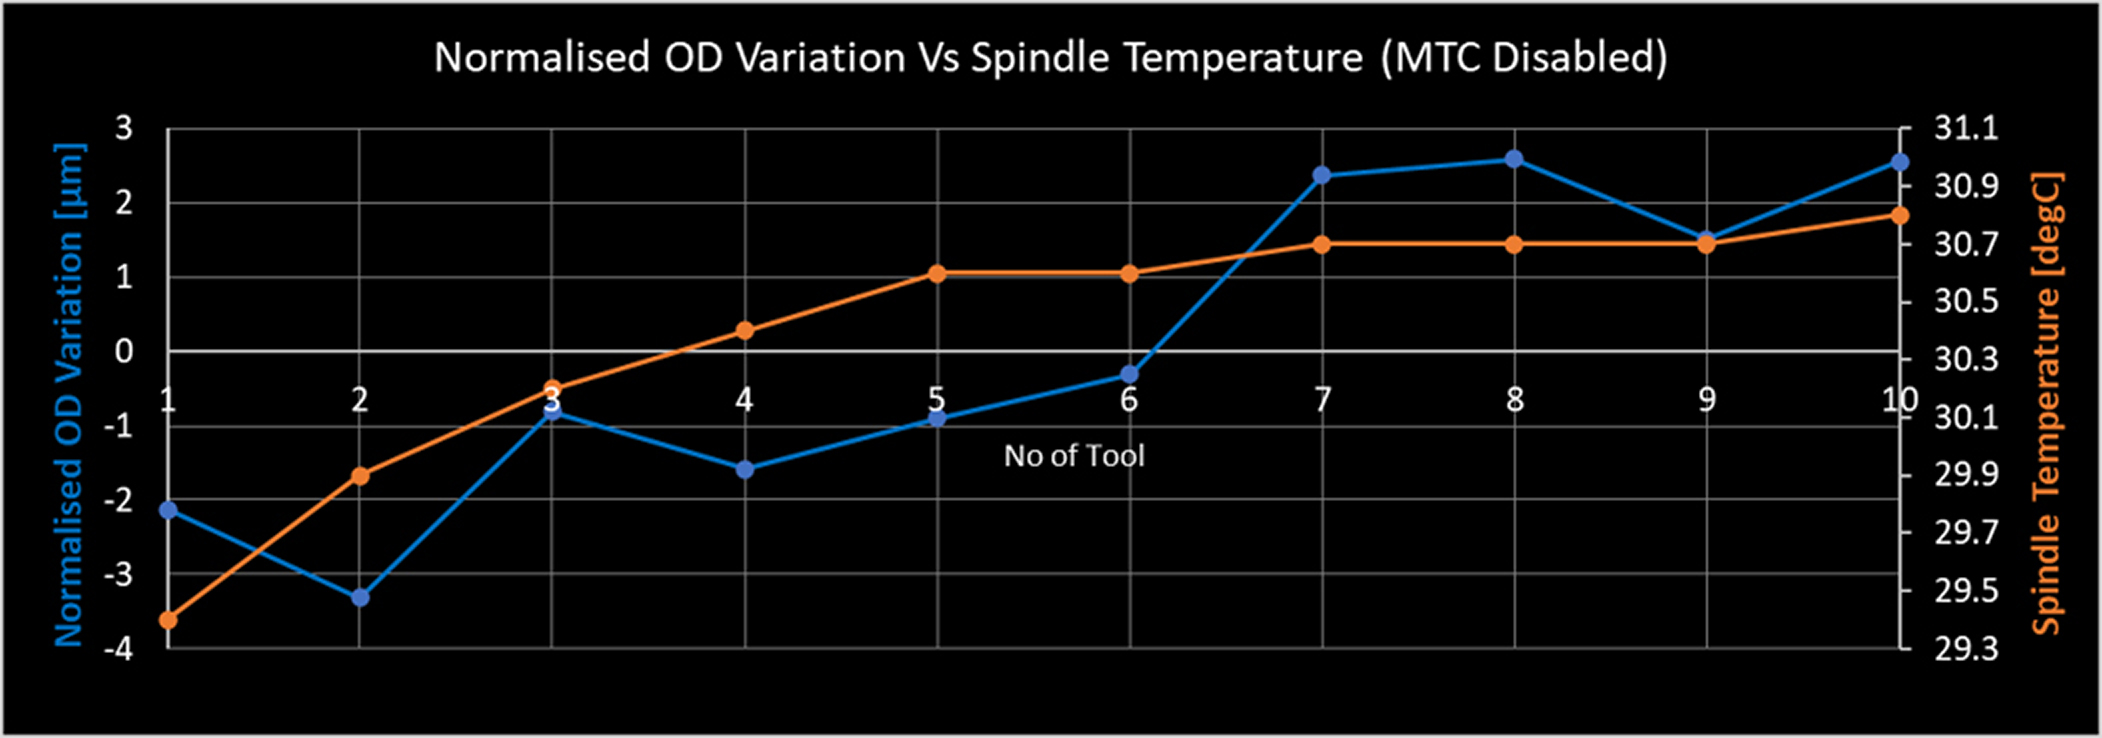 #2 Normalized OD Variation vs Spindle Temperature (MTC Disabled)